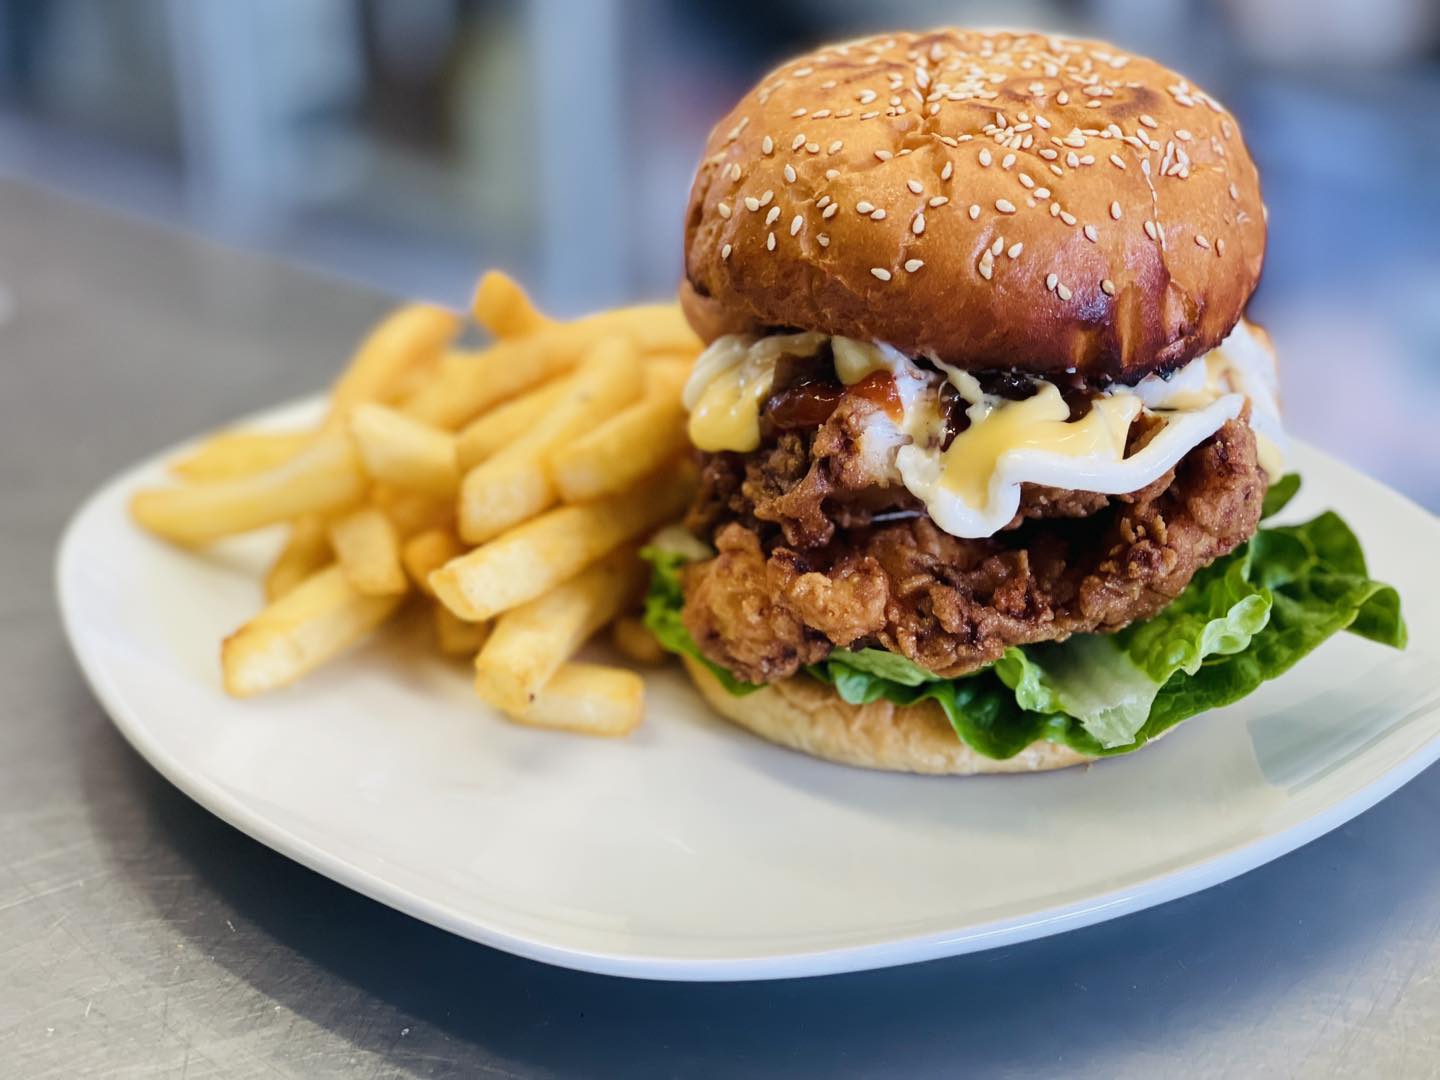 Goldie Hen Burger at the Flames Grill Bistro - Exeter, Tasmania